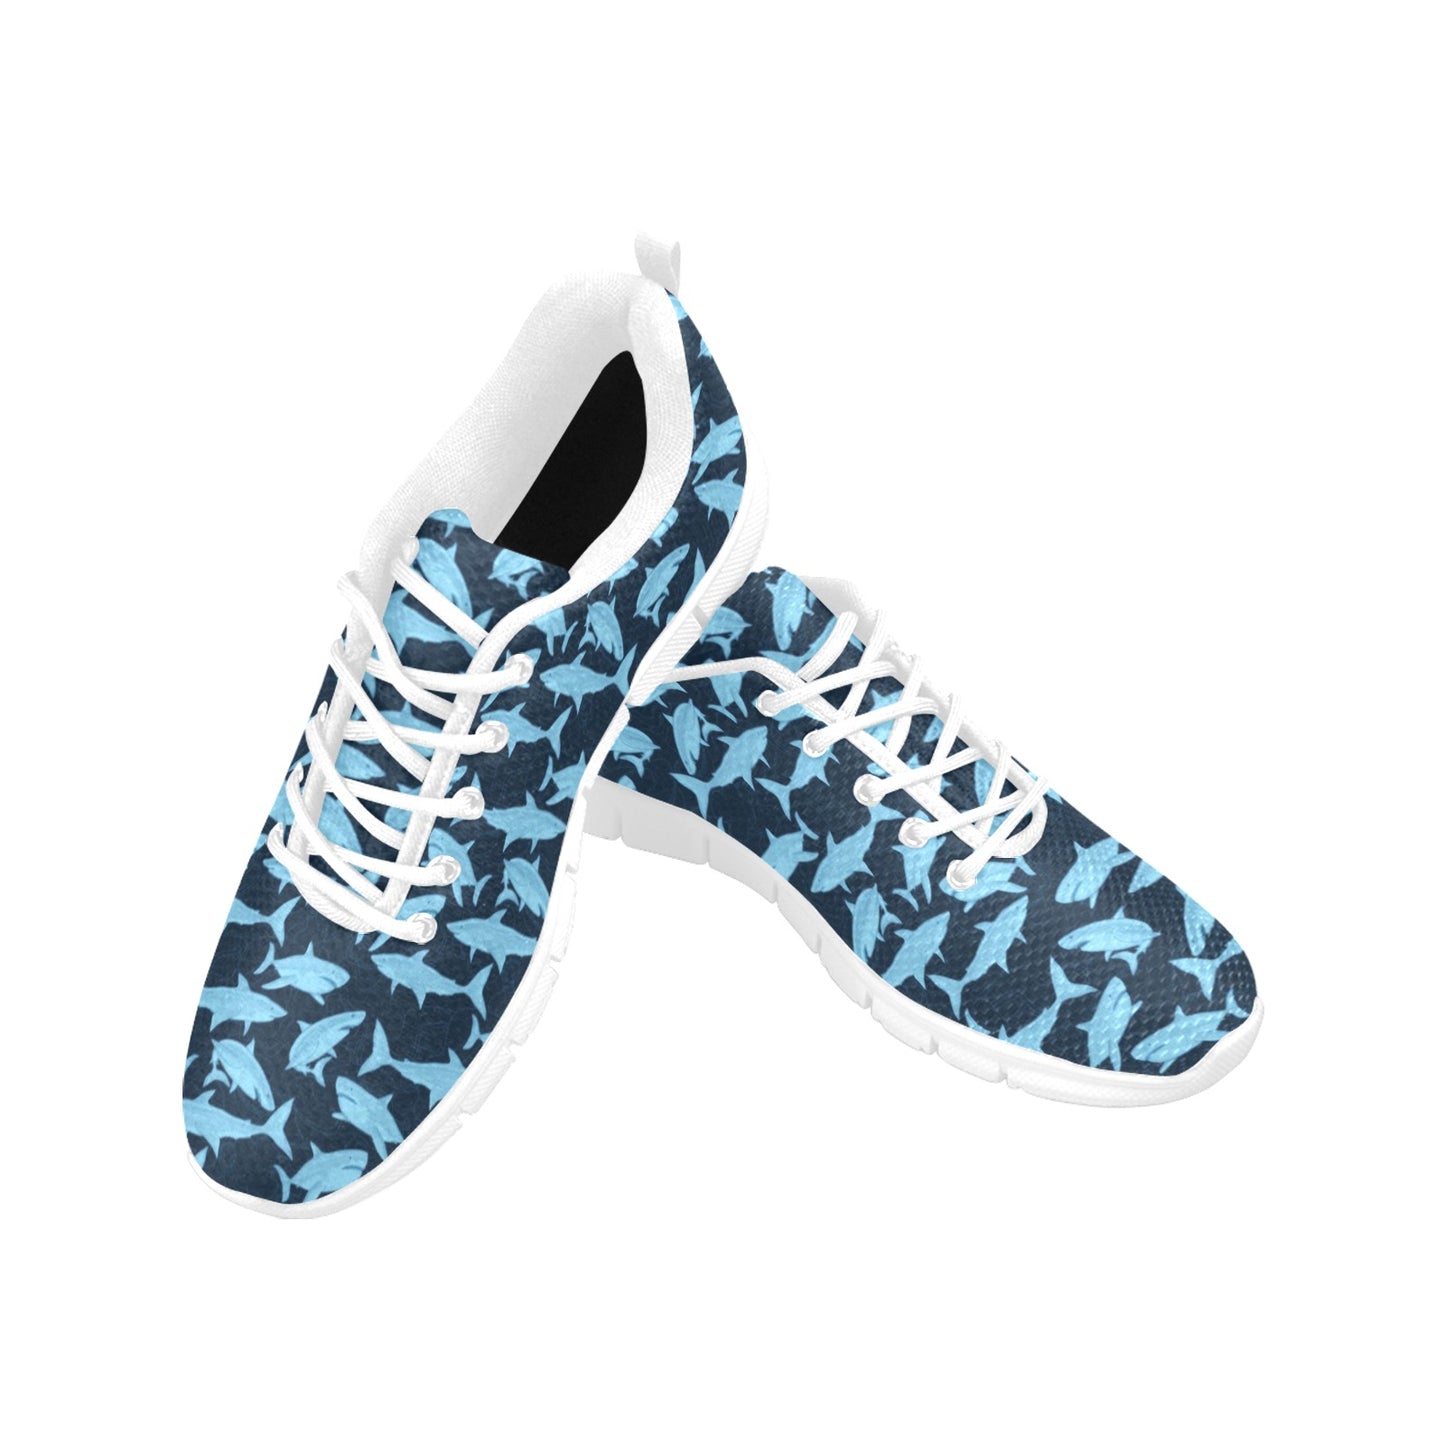 Shark Men Breathable Sneakers, Blue Fish Pattern Print Lace Up Running Custom Designer Casual Mesh Large Size Shoes